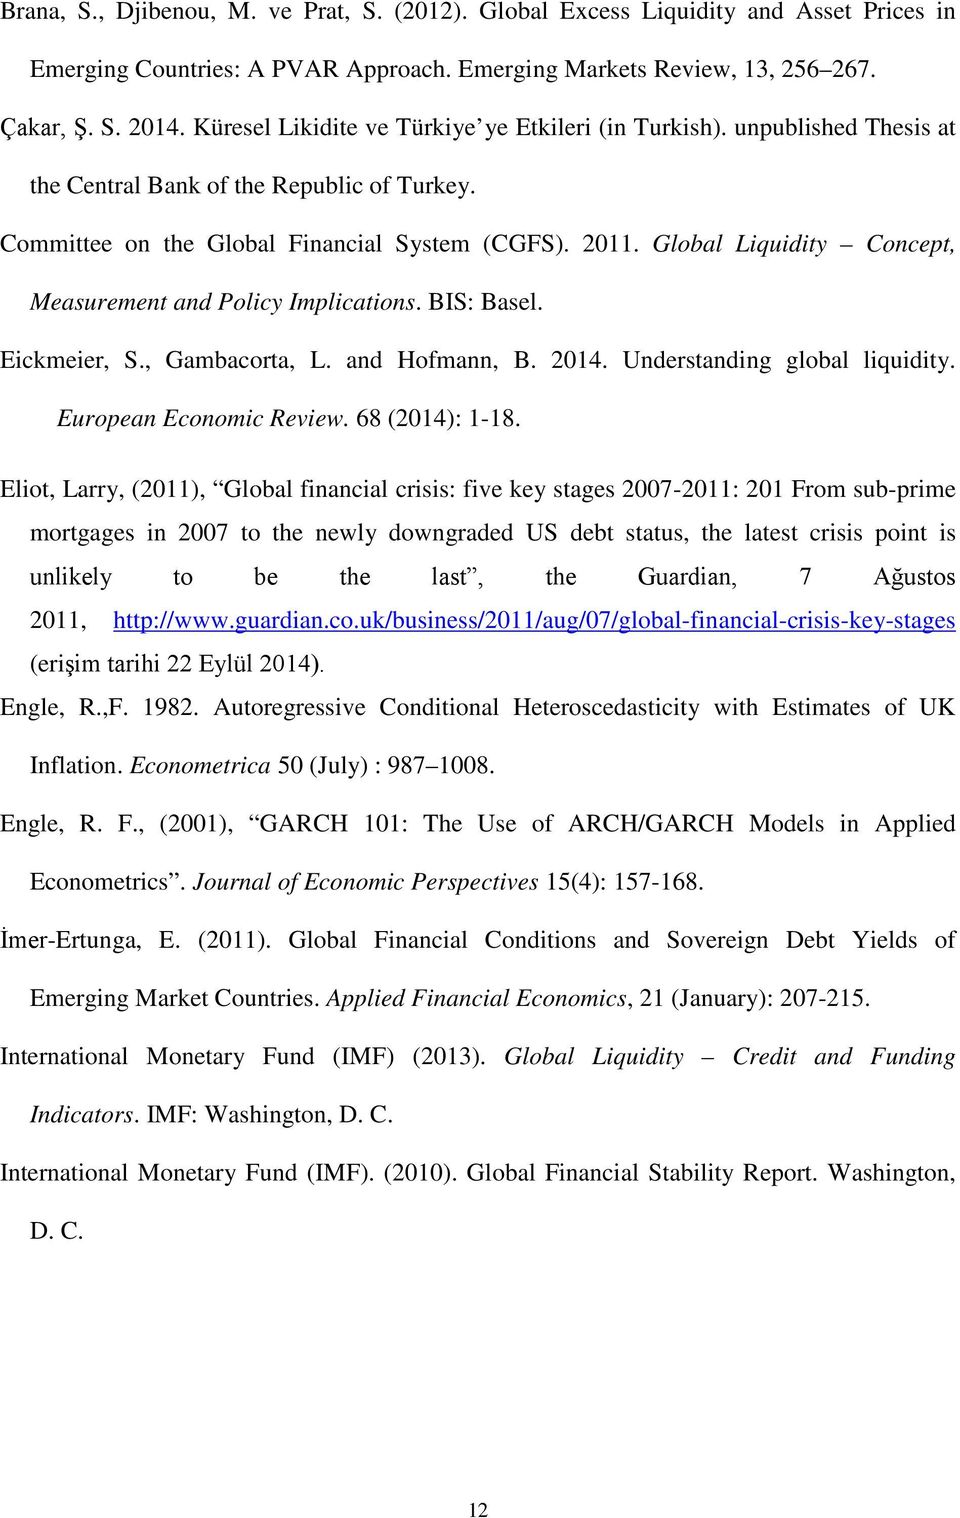 Global Liquidity Concept, Measurement and Policy Implications. BIS: Basel. Eickmeier, S., Gambacorta, L. and Hofmann, B. 014. Understanding global liquidity. European Economic Review. 68 (014): 1-18.